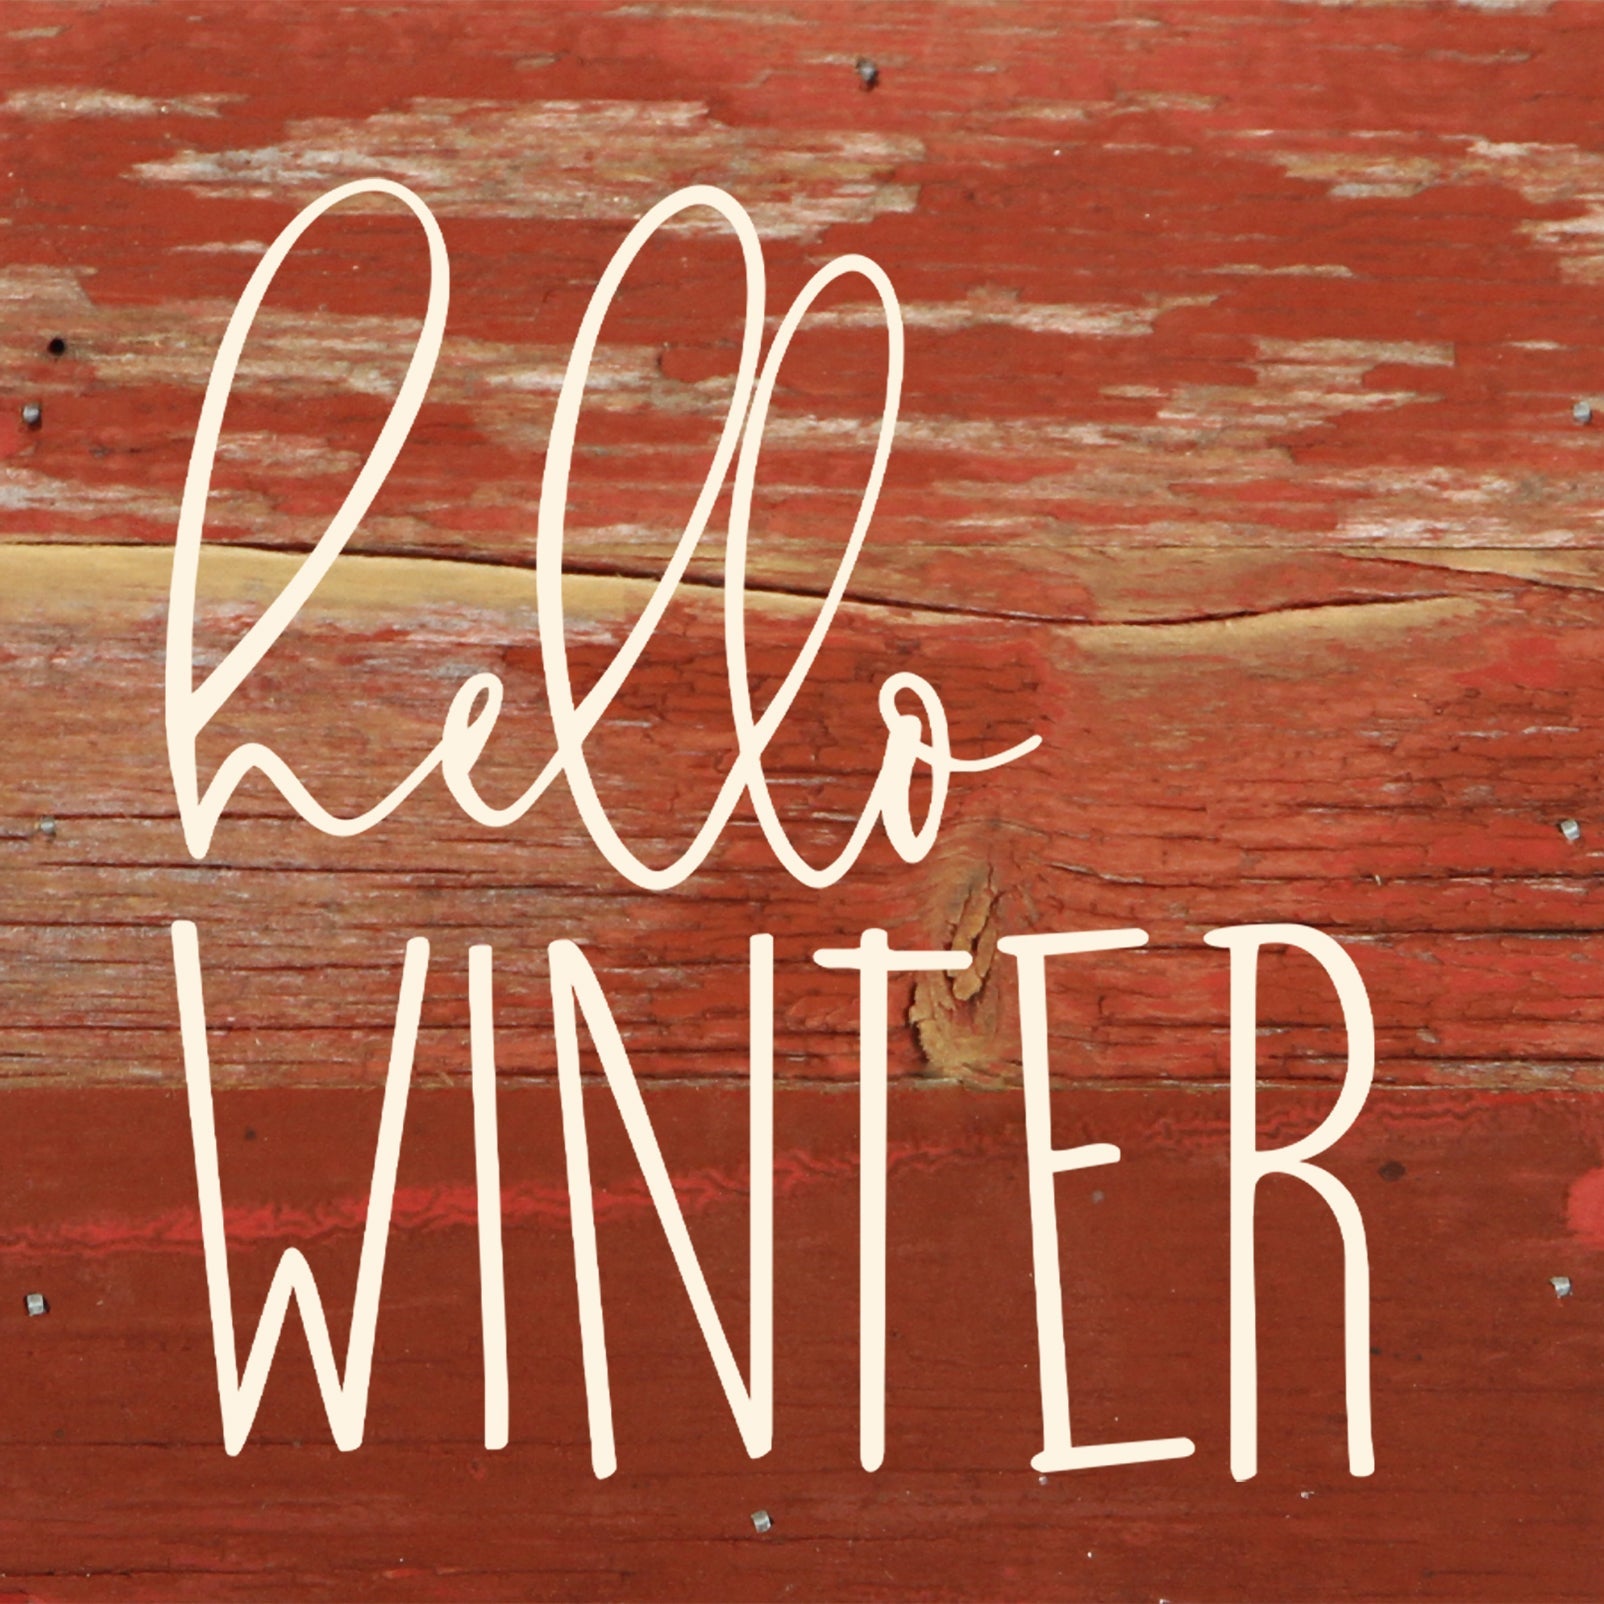 Hello winter / 6"x6" Reclaimed Wood Sign